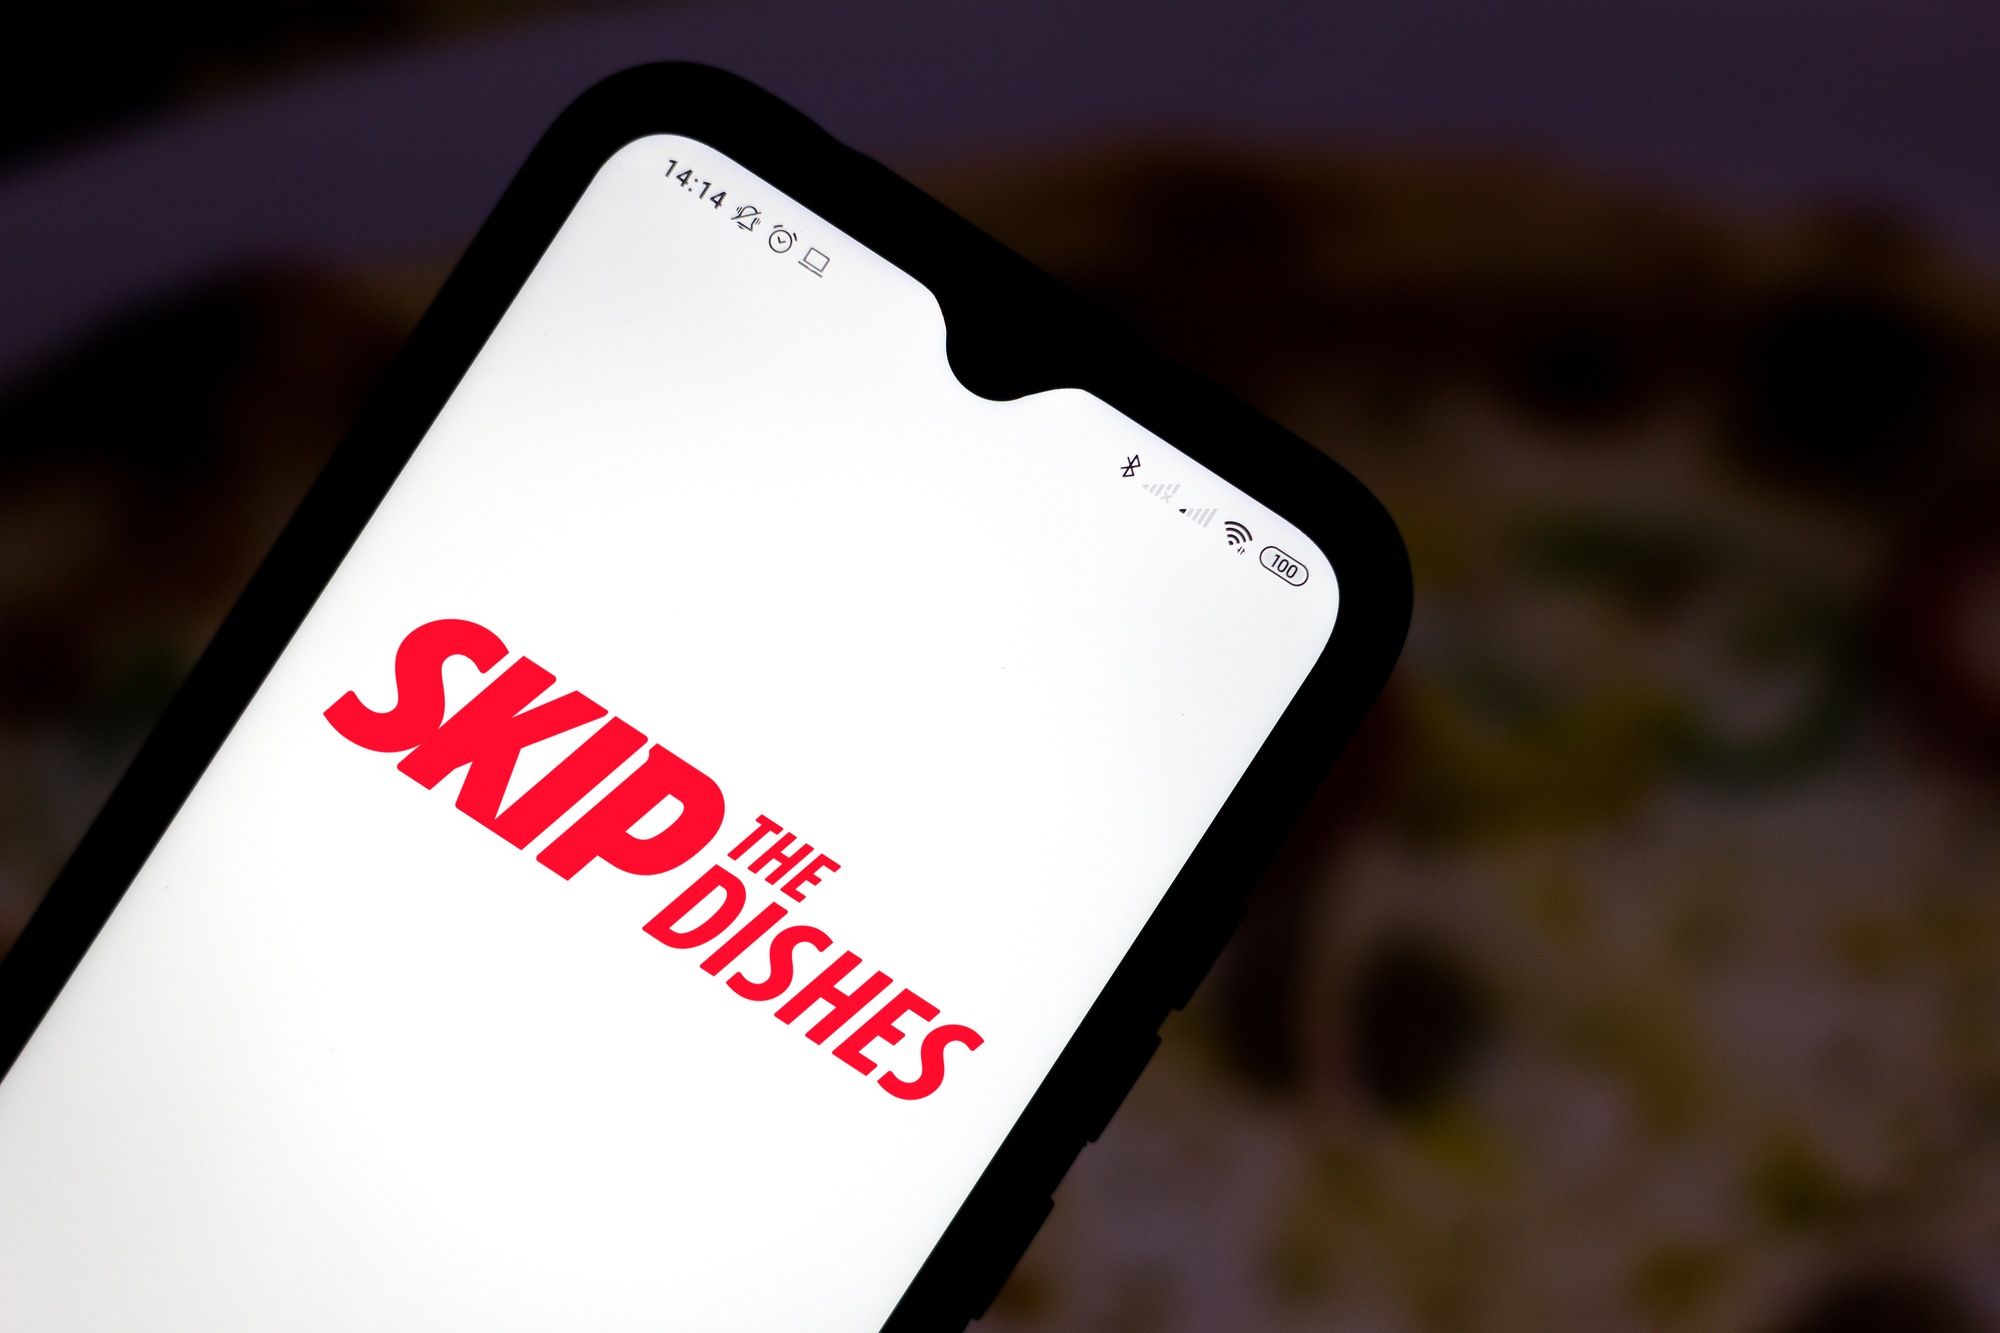 Skip the dishes logo on app regarding the skip the dishes class action lawsuit filed